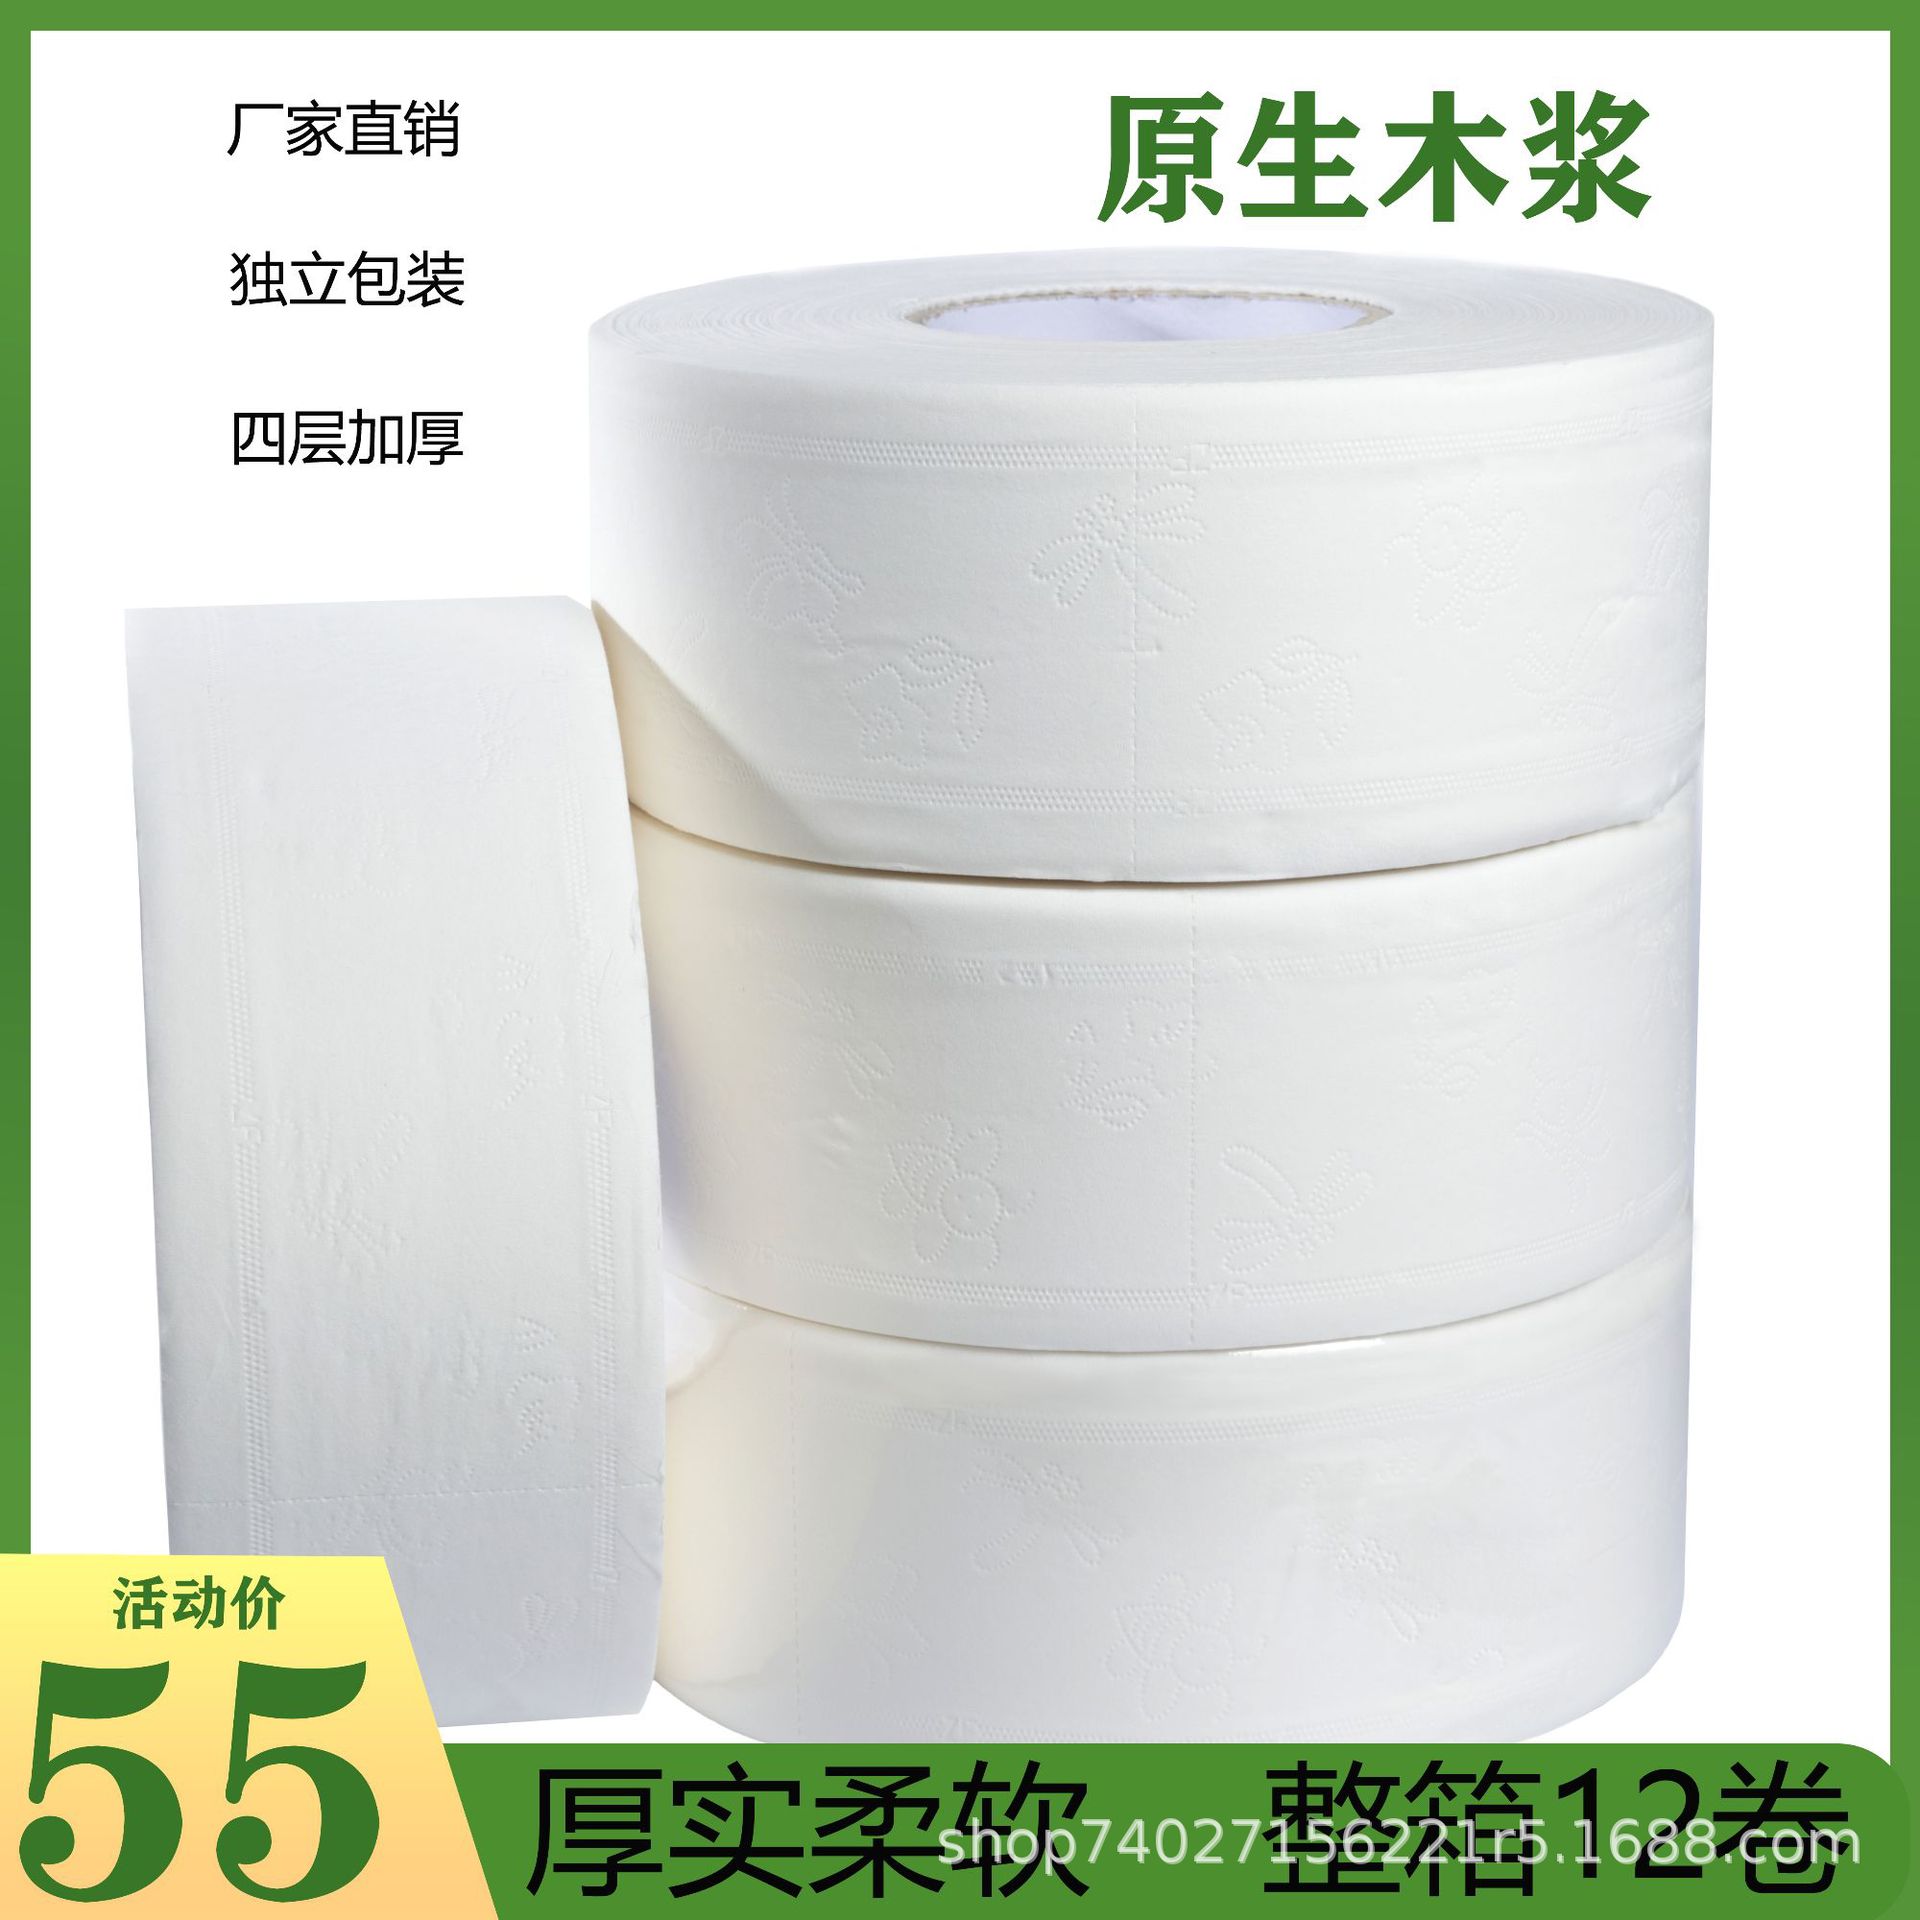 roll of paper Toilet paper Large market toilet paper commercial hotel Dedicated TOILET toilet Large Web Full container